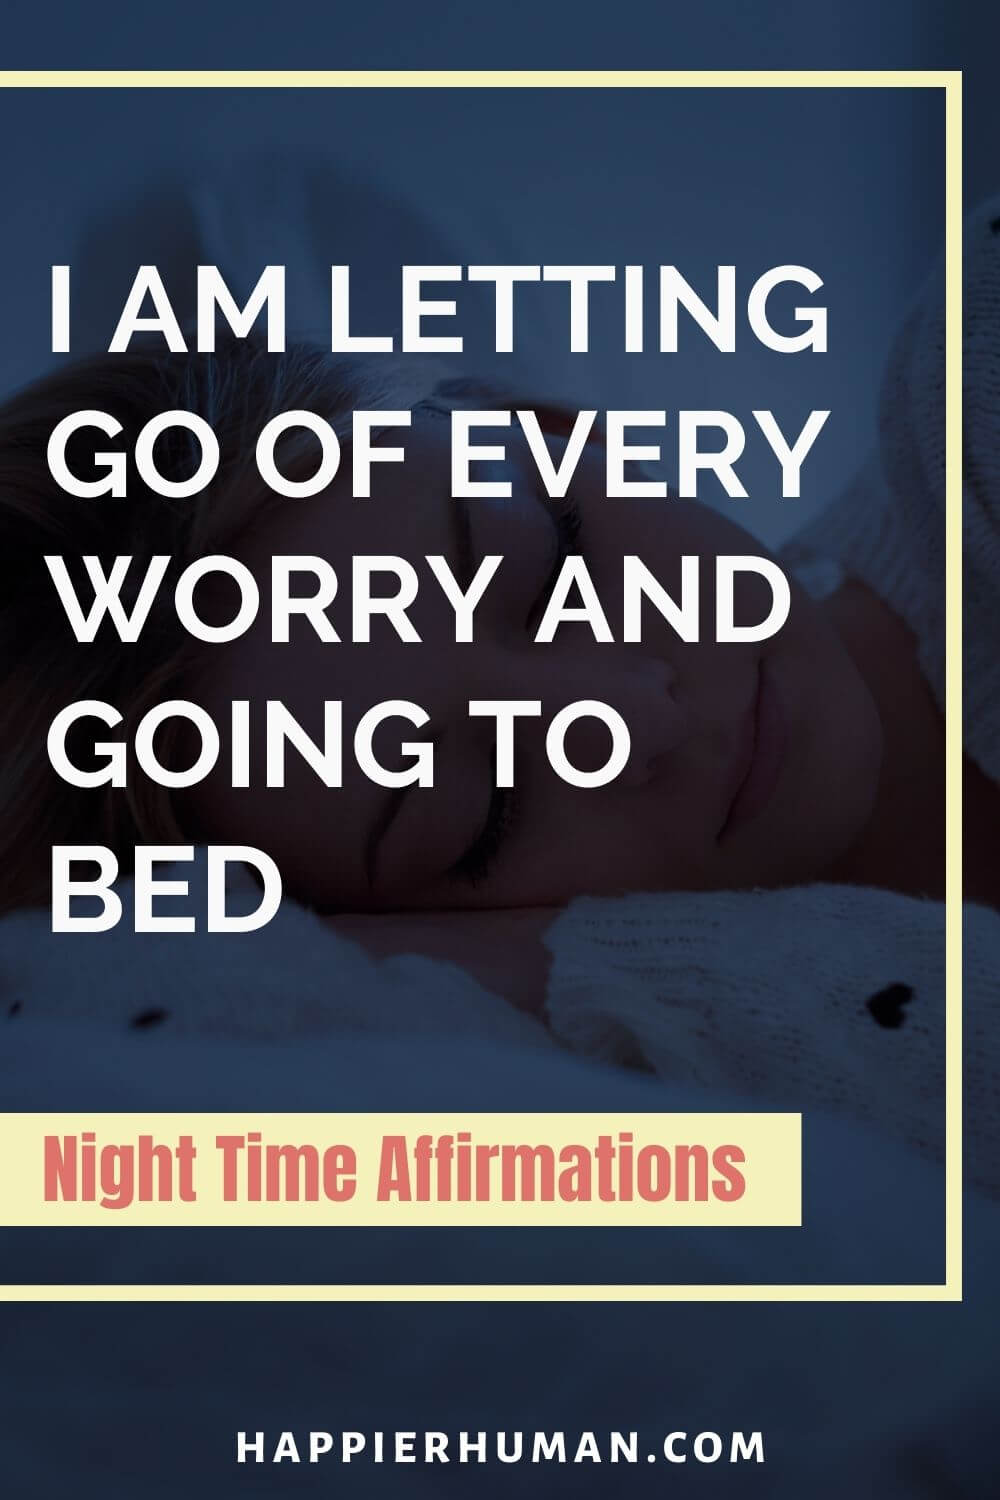 Night Time Affirmations - I am letting go of every worry and going to bed | bedtime affirmations miracle morning | 5 bedtime affirmations | 15 bedtime affirmations